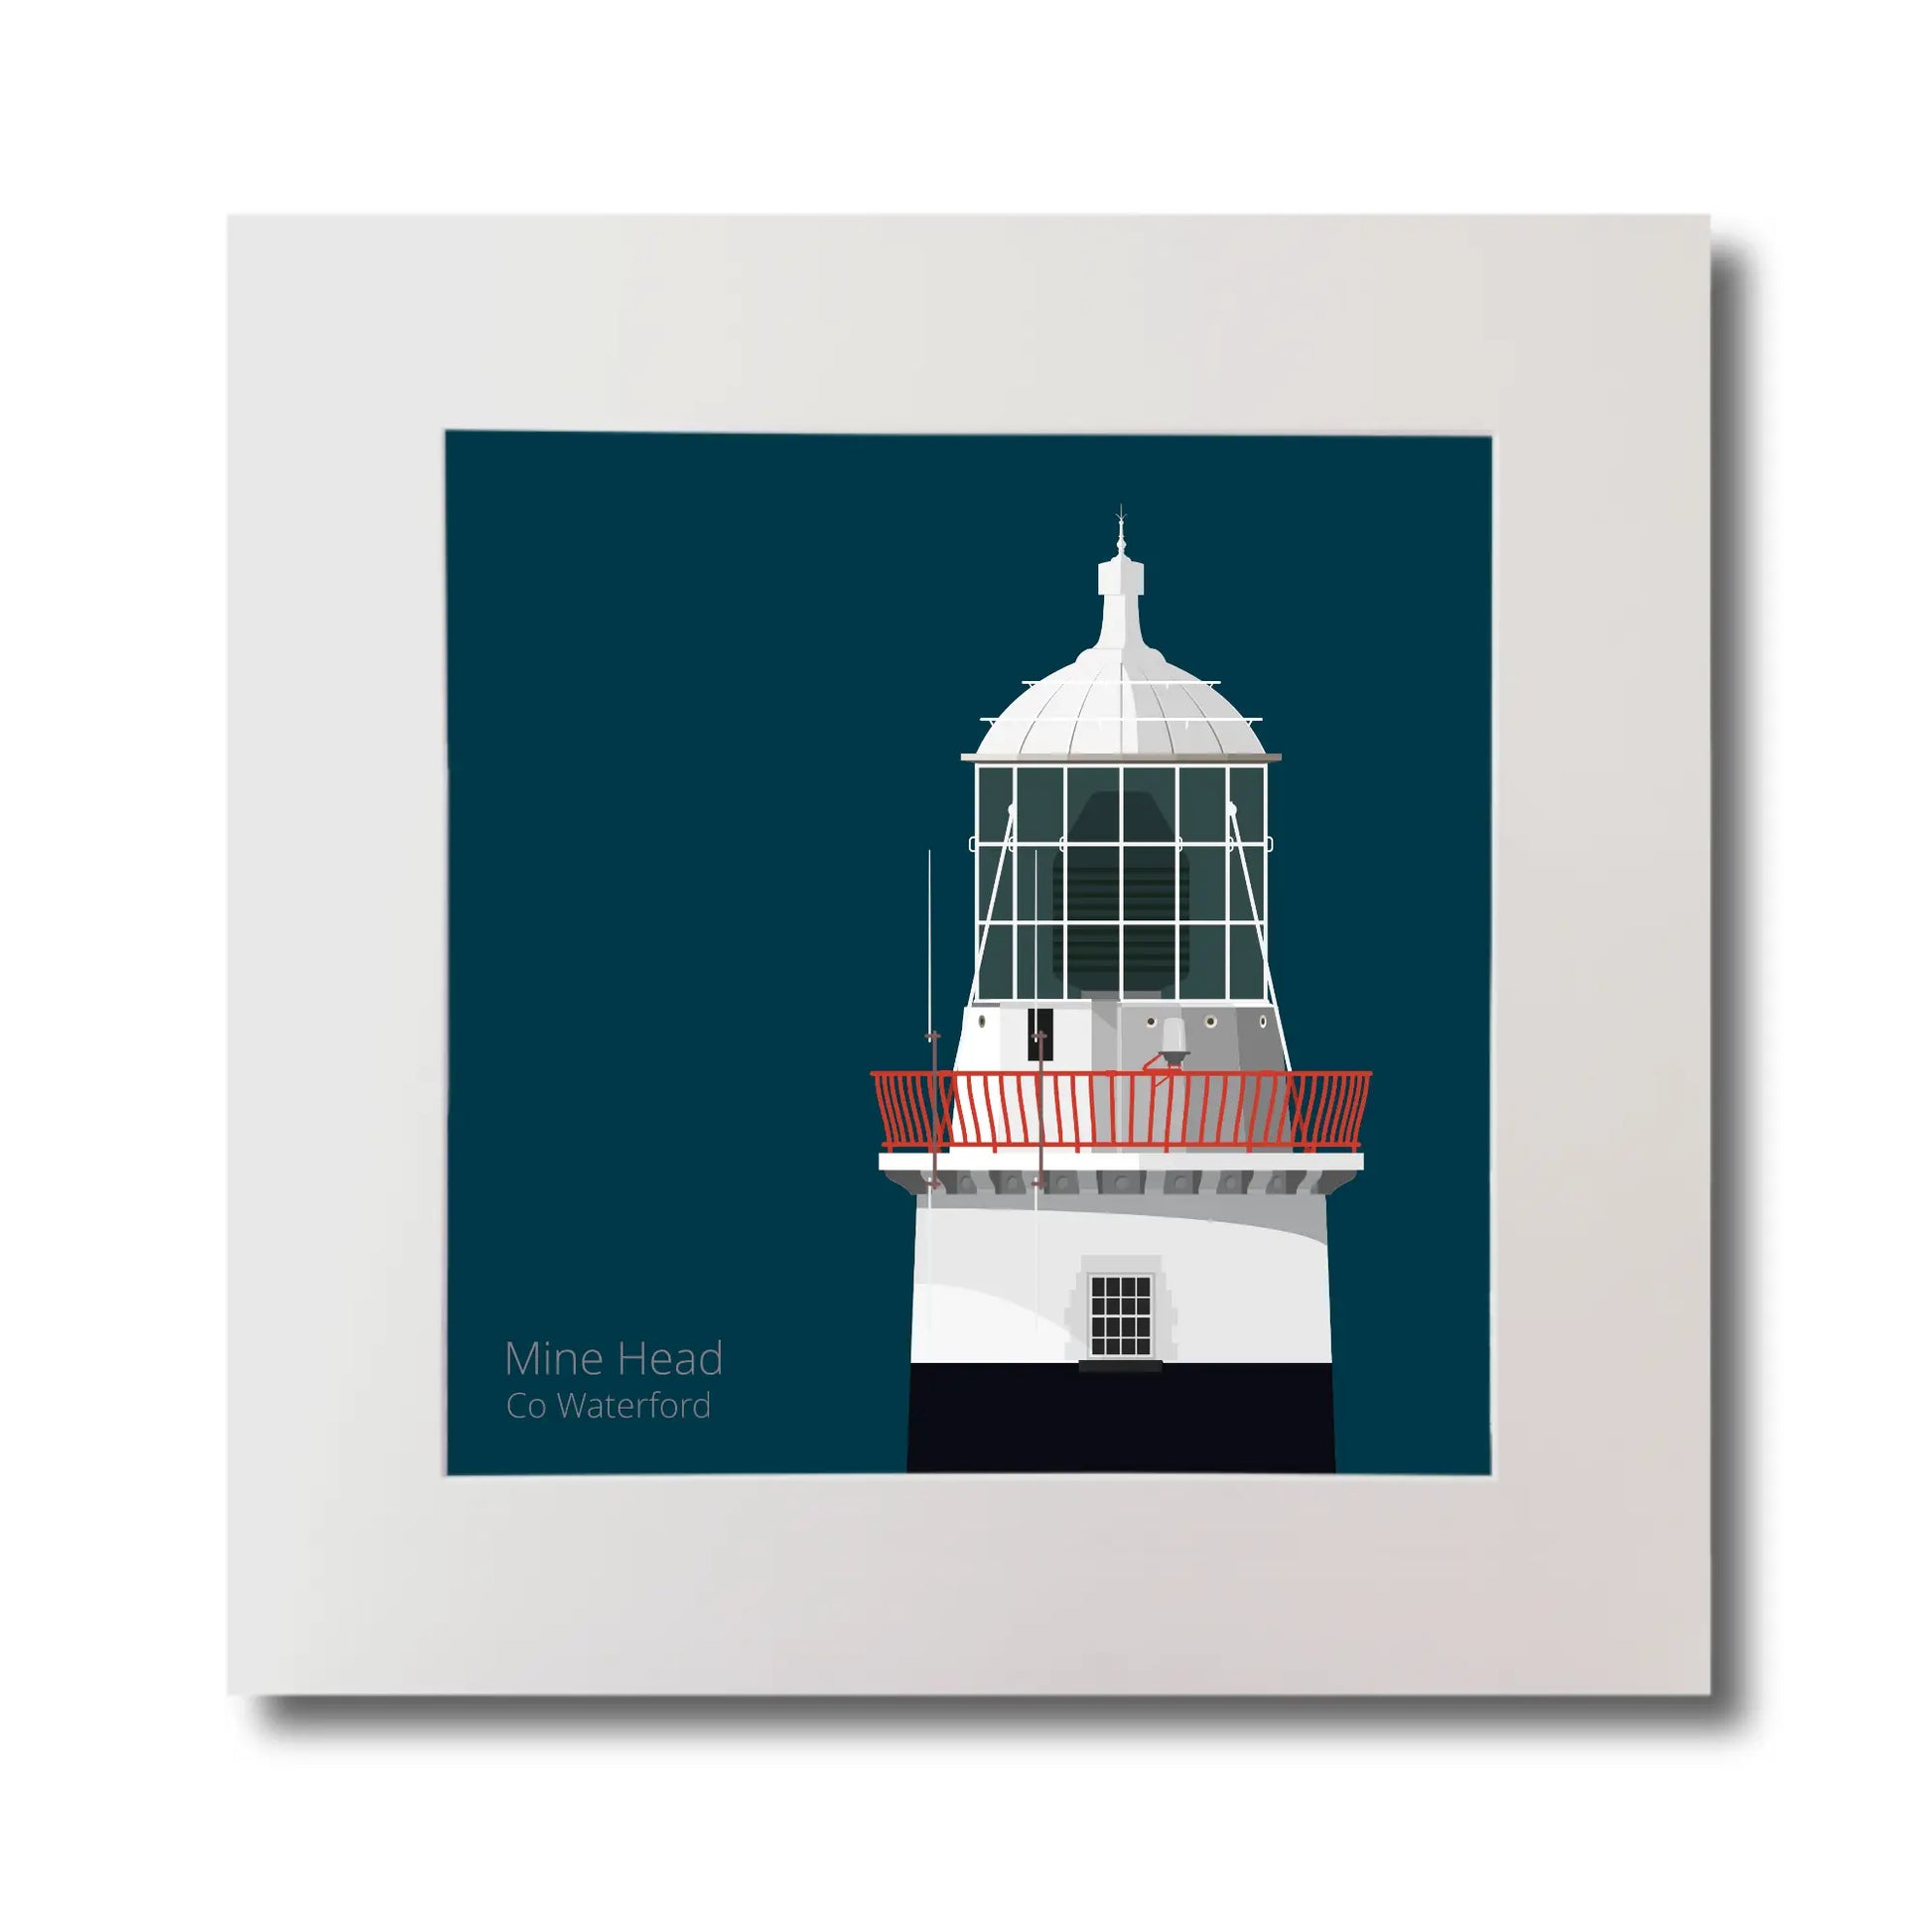 Illustration of Mine Head lighthouse on a midnight blue background, mounted and measuring 30x30cm.